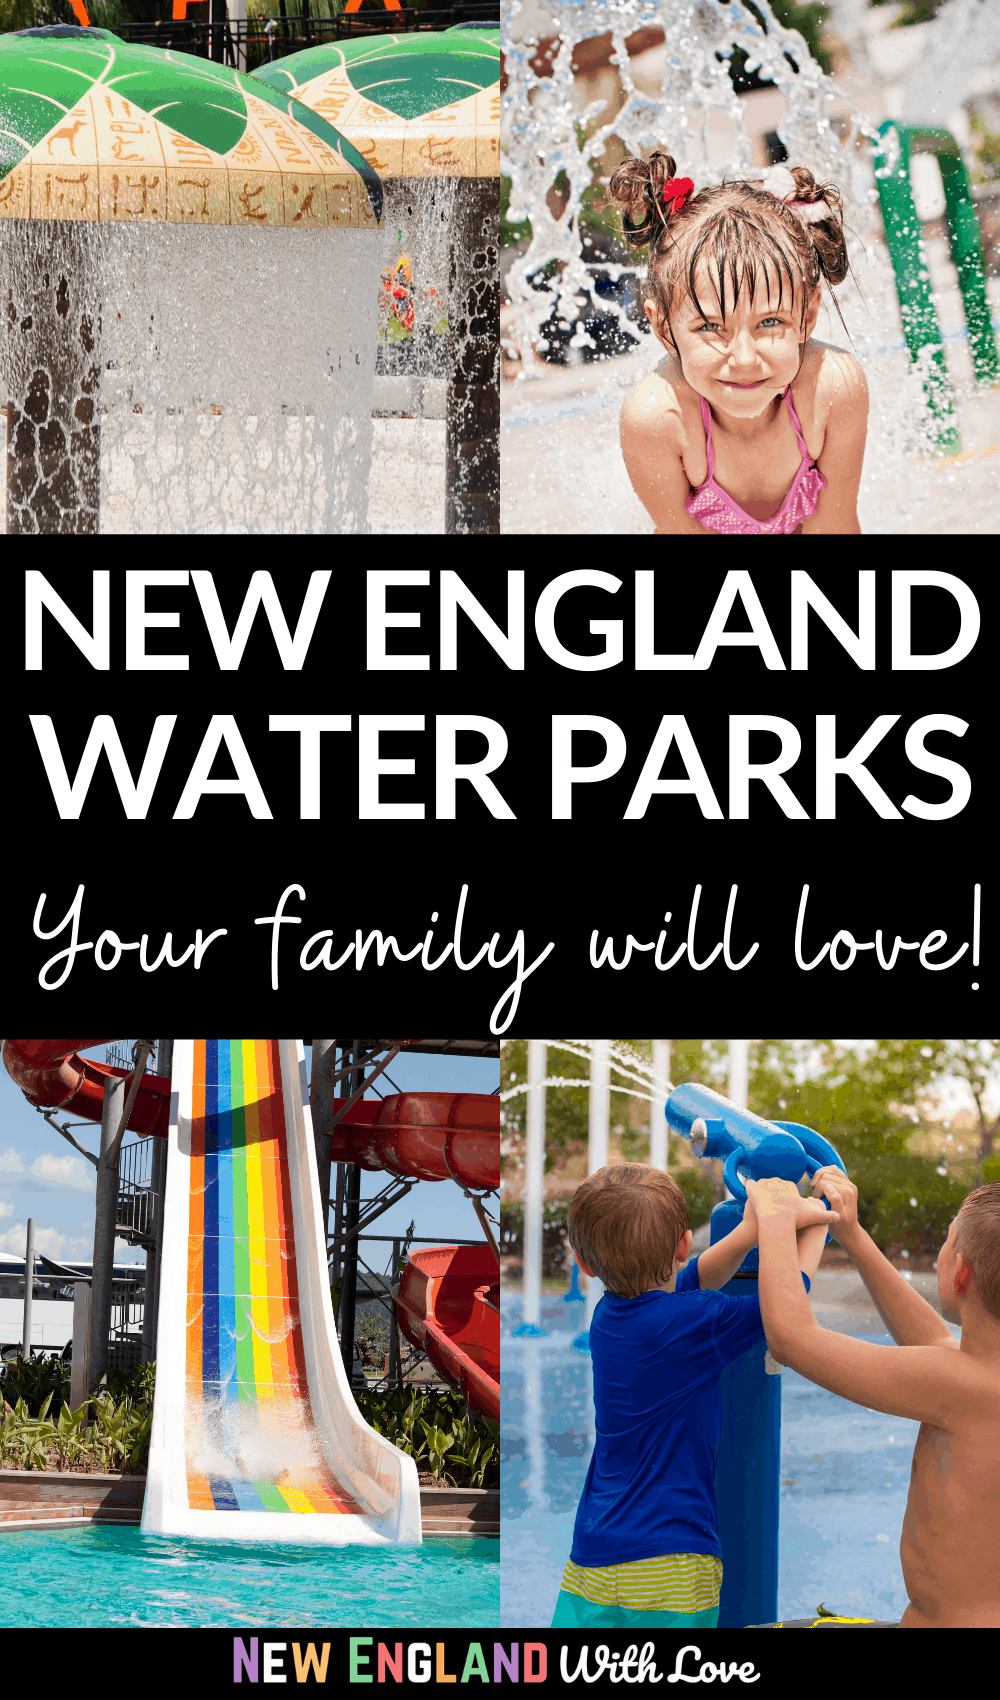 Pinterest graphic reading "NEW ENGLAND WATER PARKS Your family will love!"